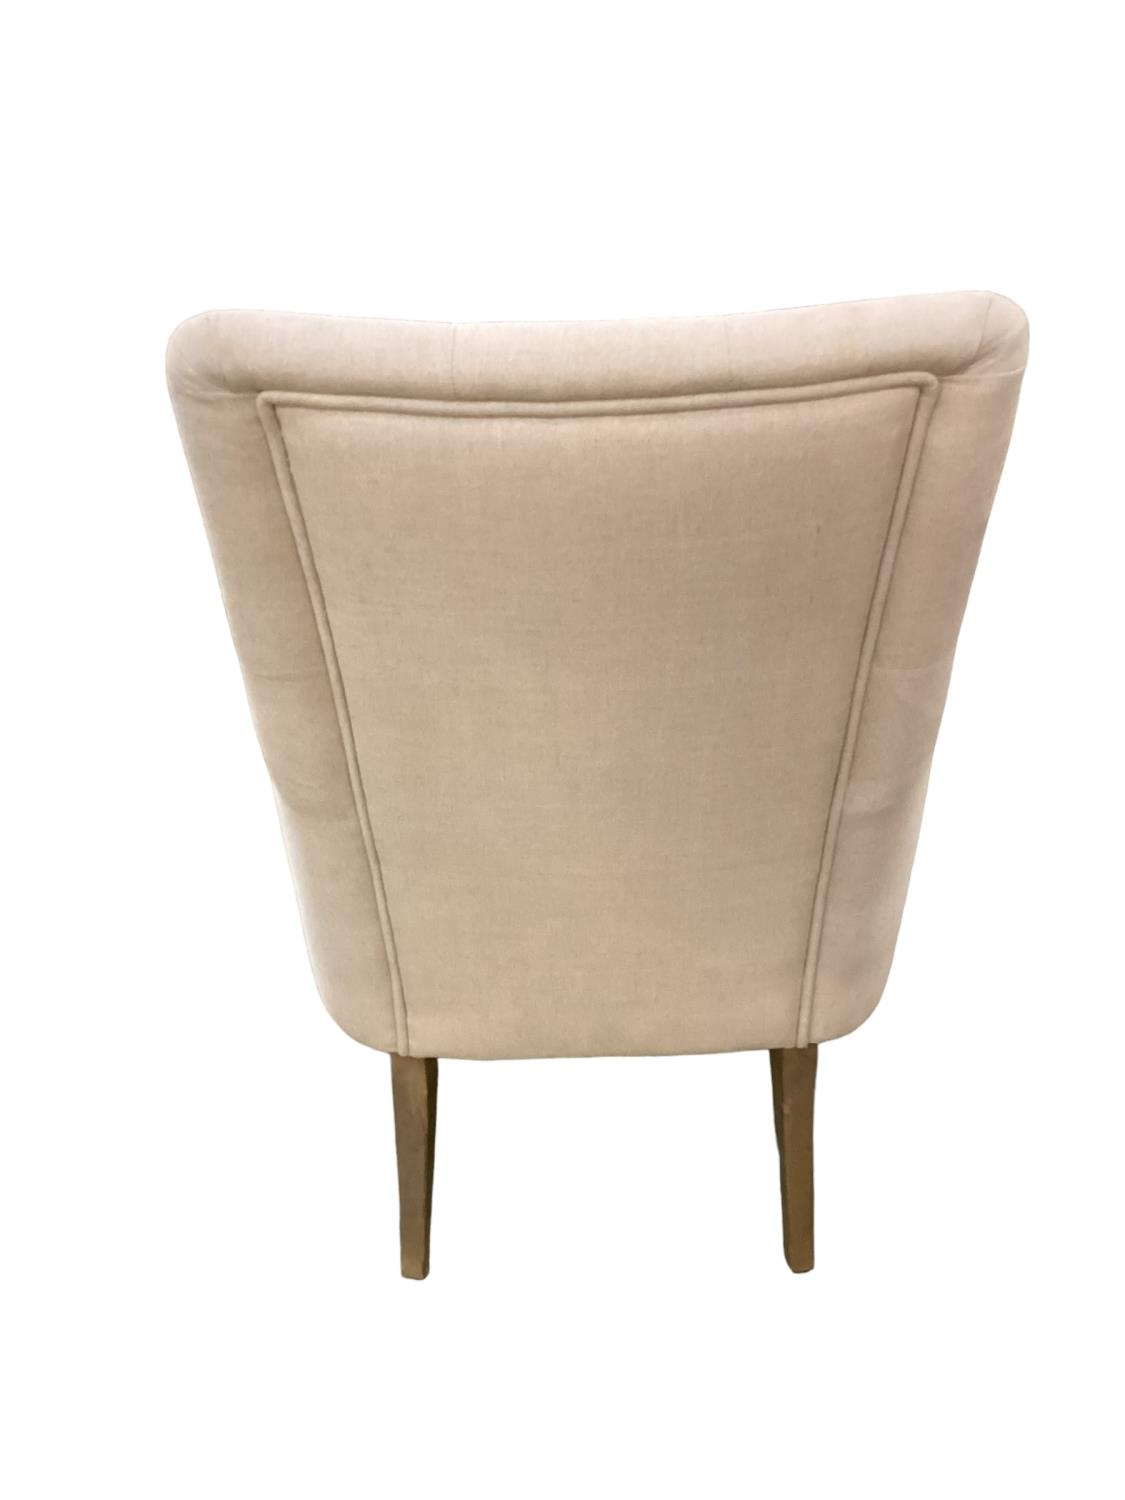 A modern cream upholstered button back chair, raised on wooden feet, some areas of wear/marks - Image 2 of 3